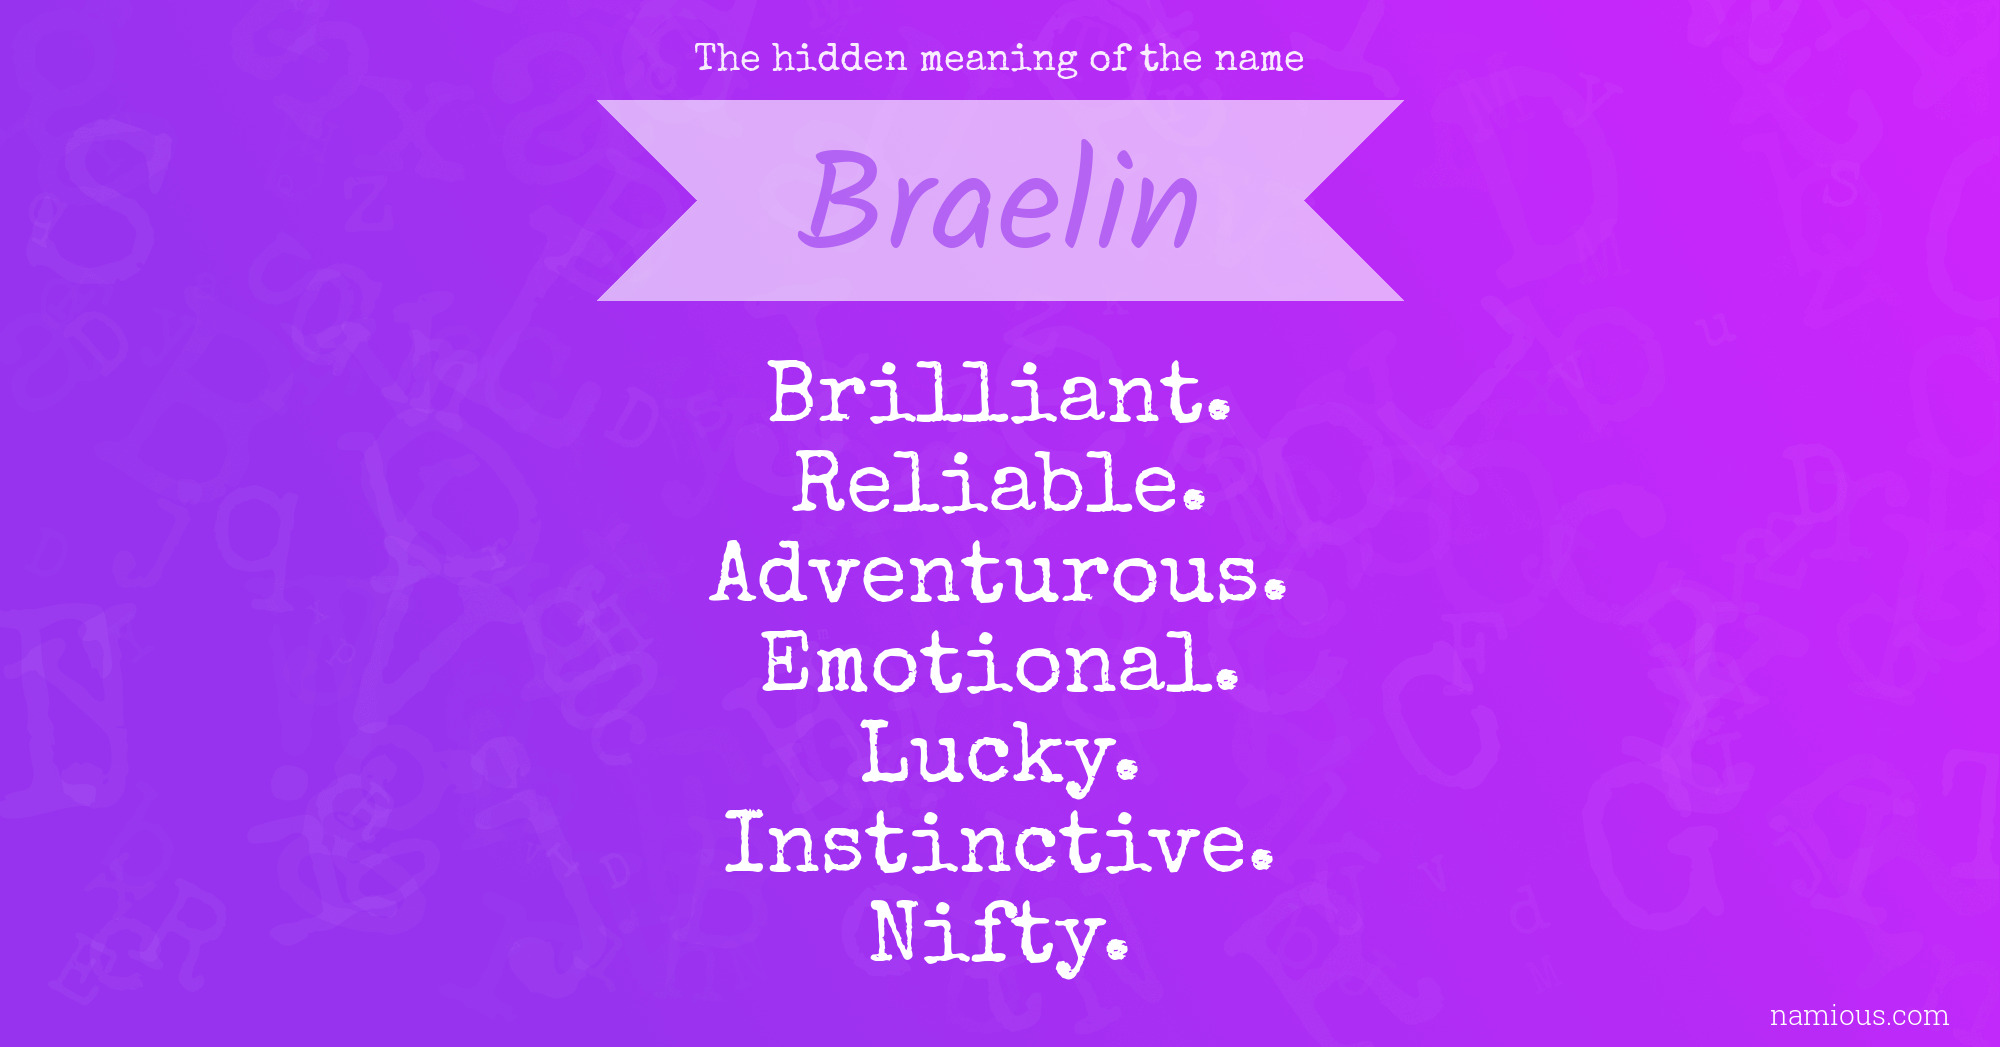 The hidden meaning of the name Braelin